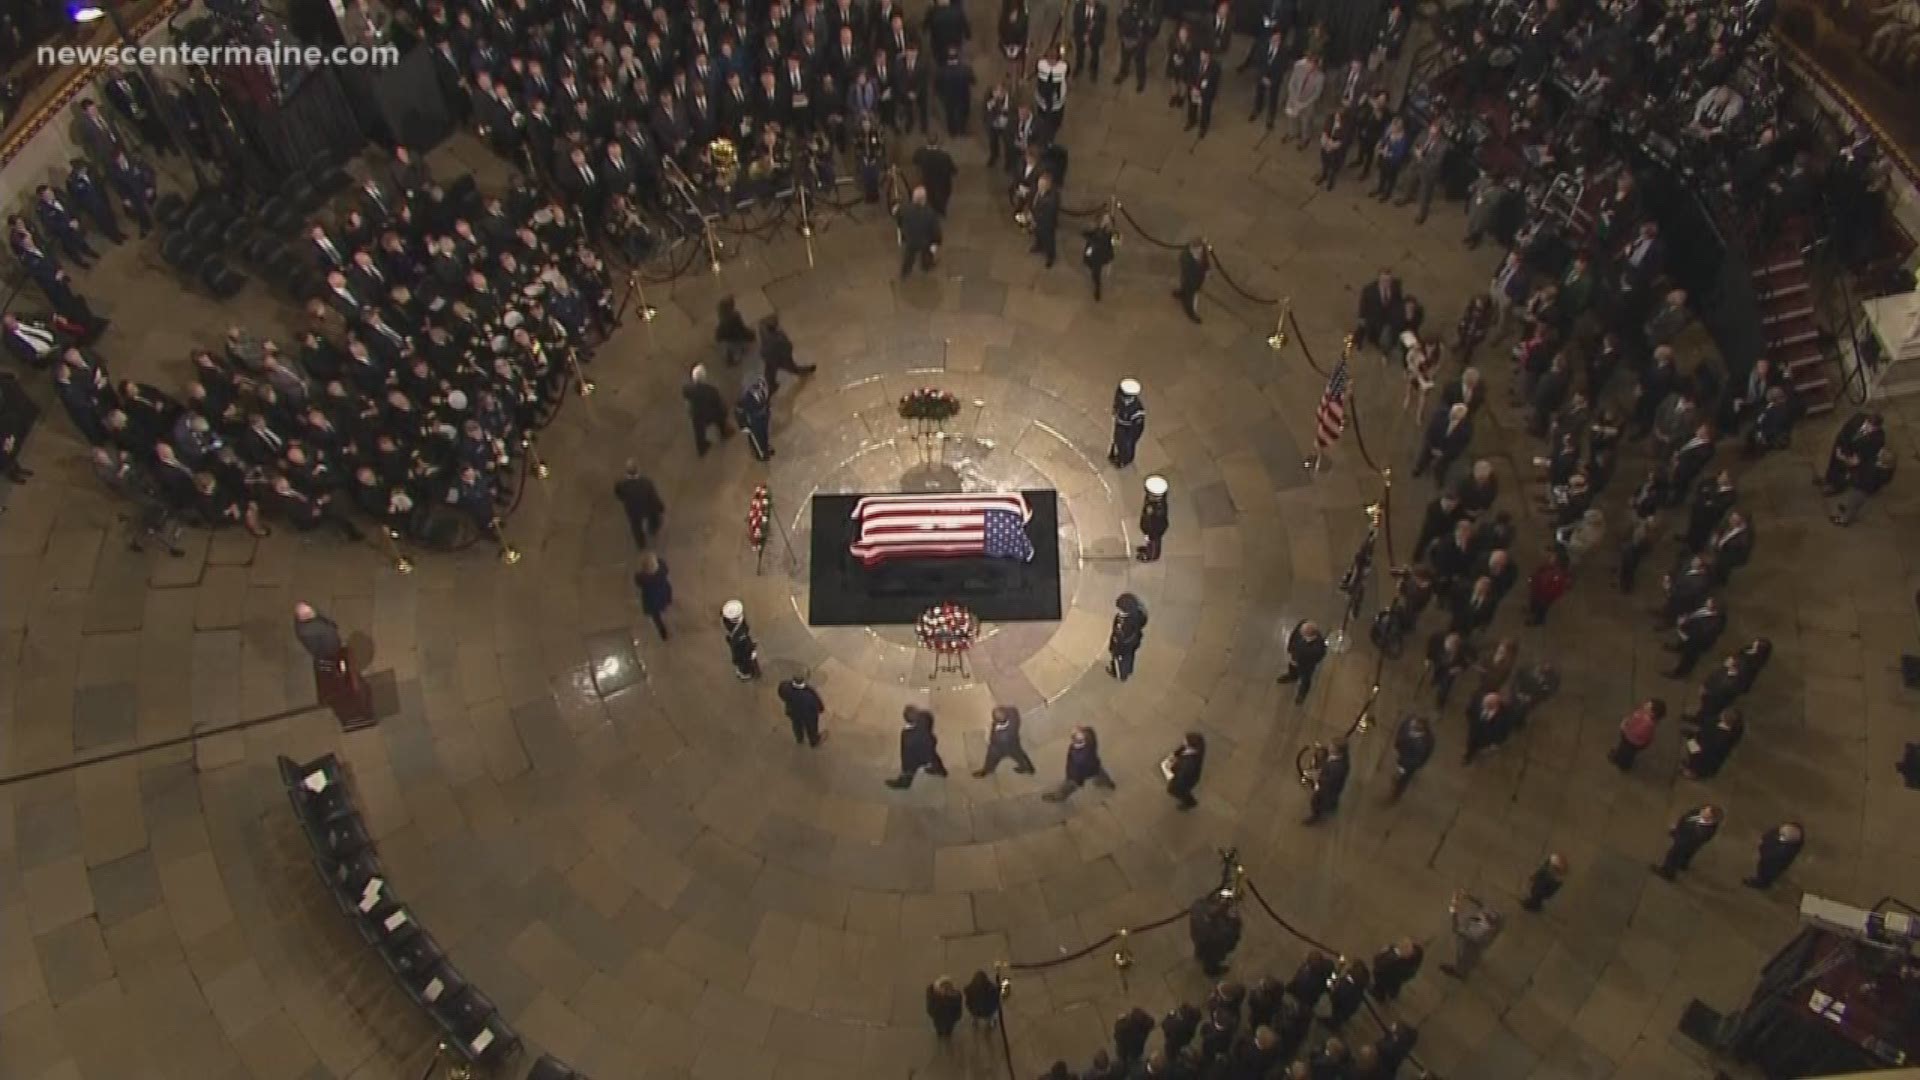 Maine reflects as body of President Bush arrives in Washington D.C.